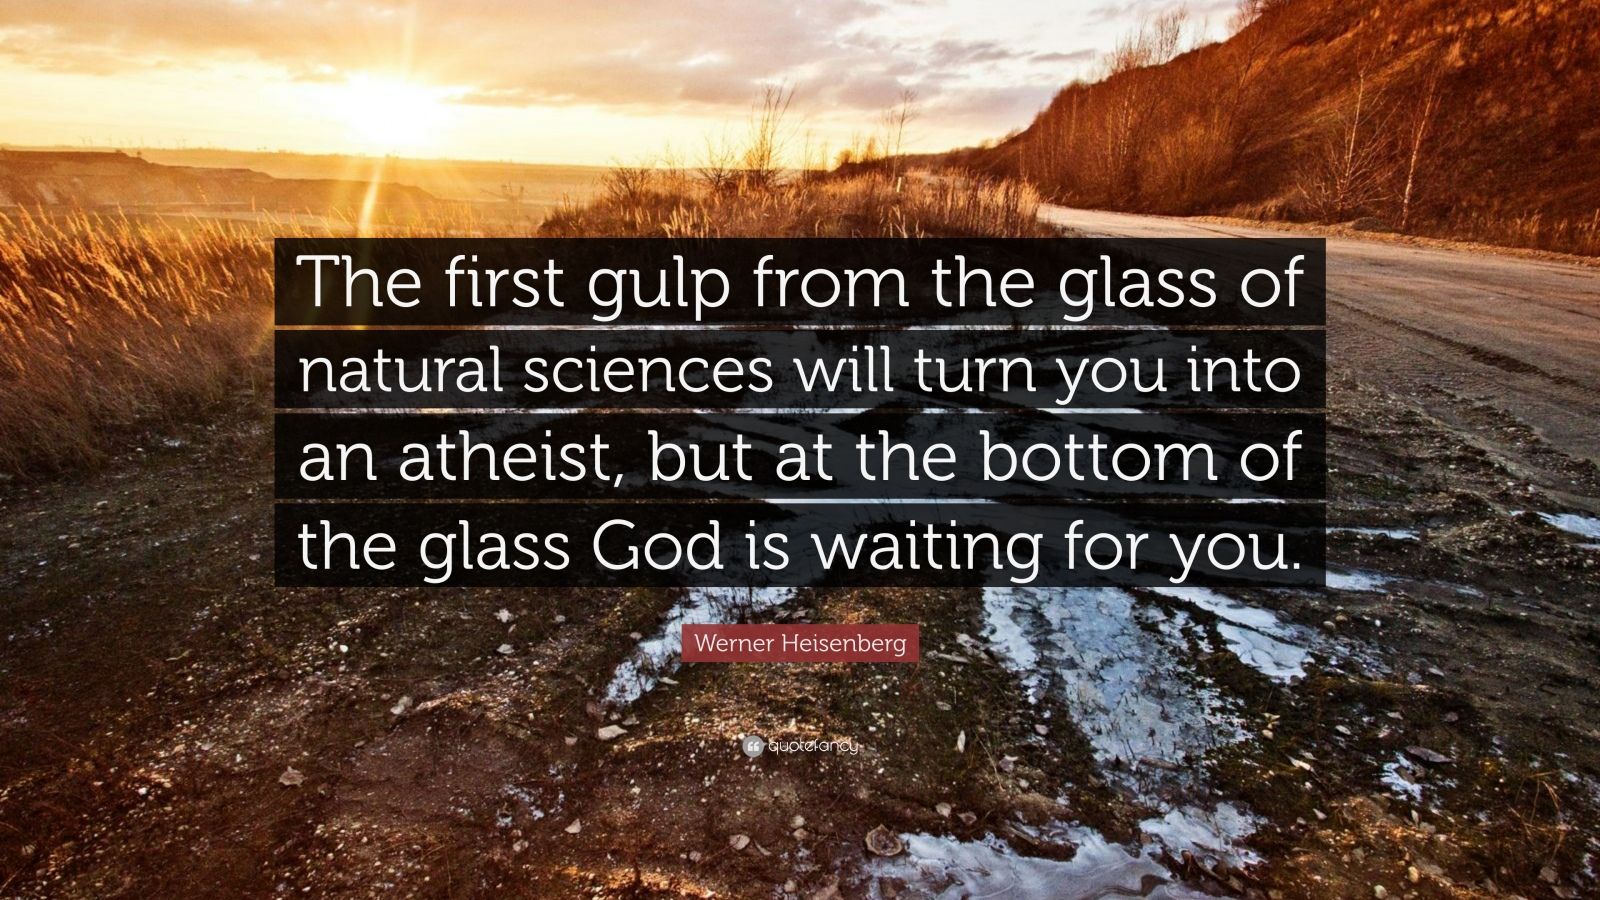 Werner Heisenberg Quote: “The first gulp from the glass of natural